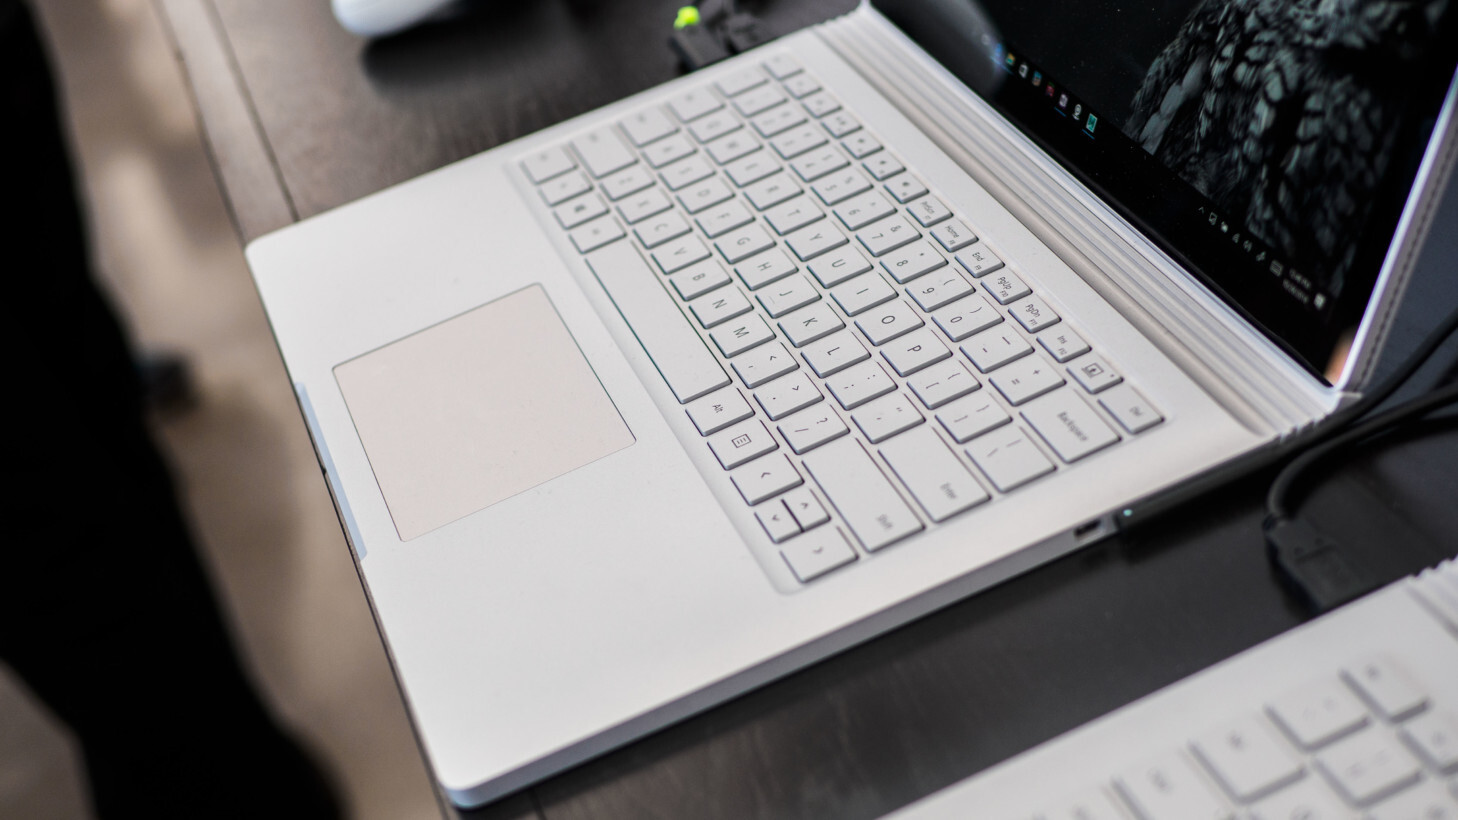 Surface Book i7 with Performance Base hands-on: neat, but a missed opportunity